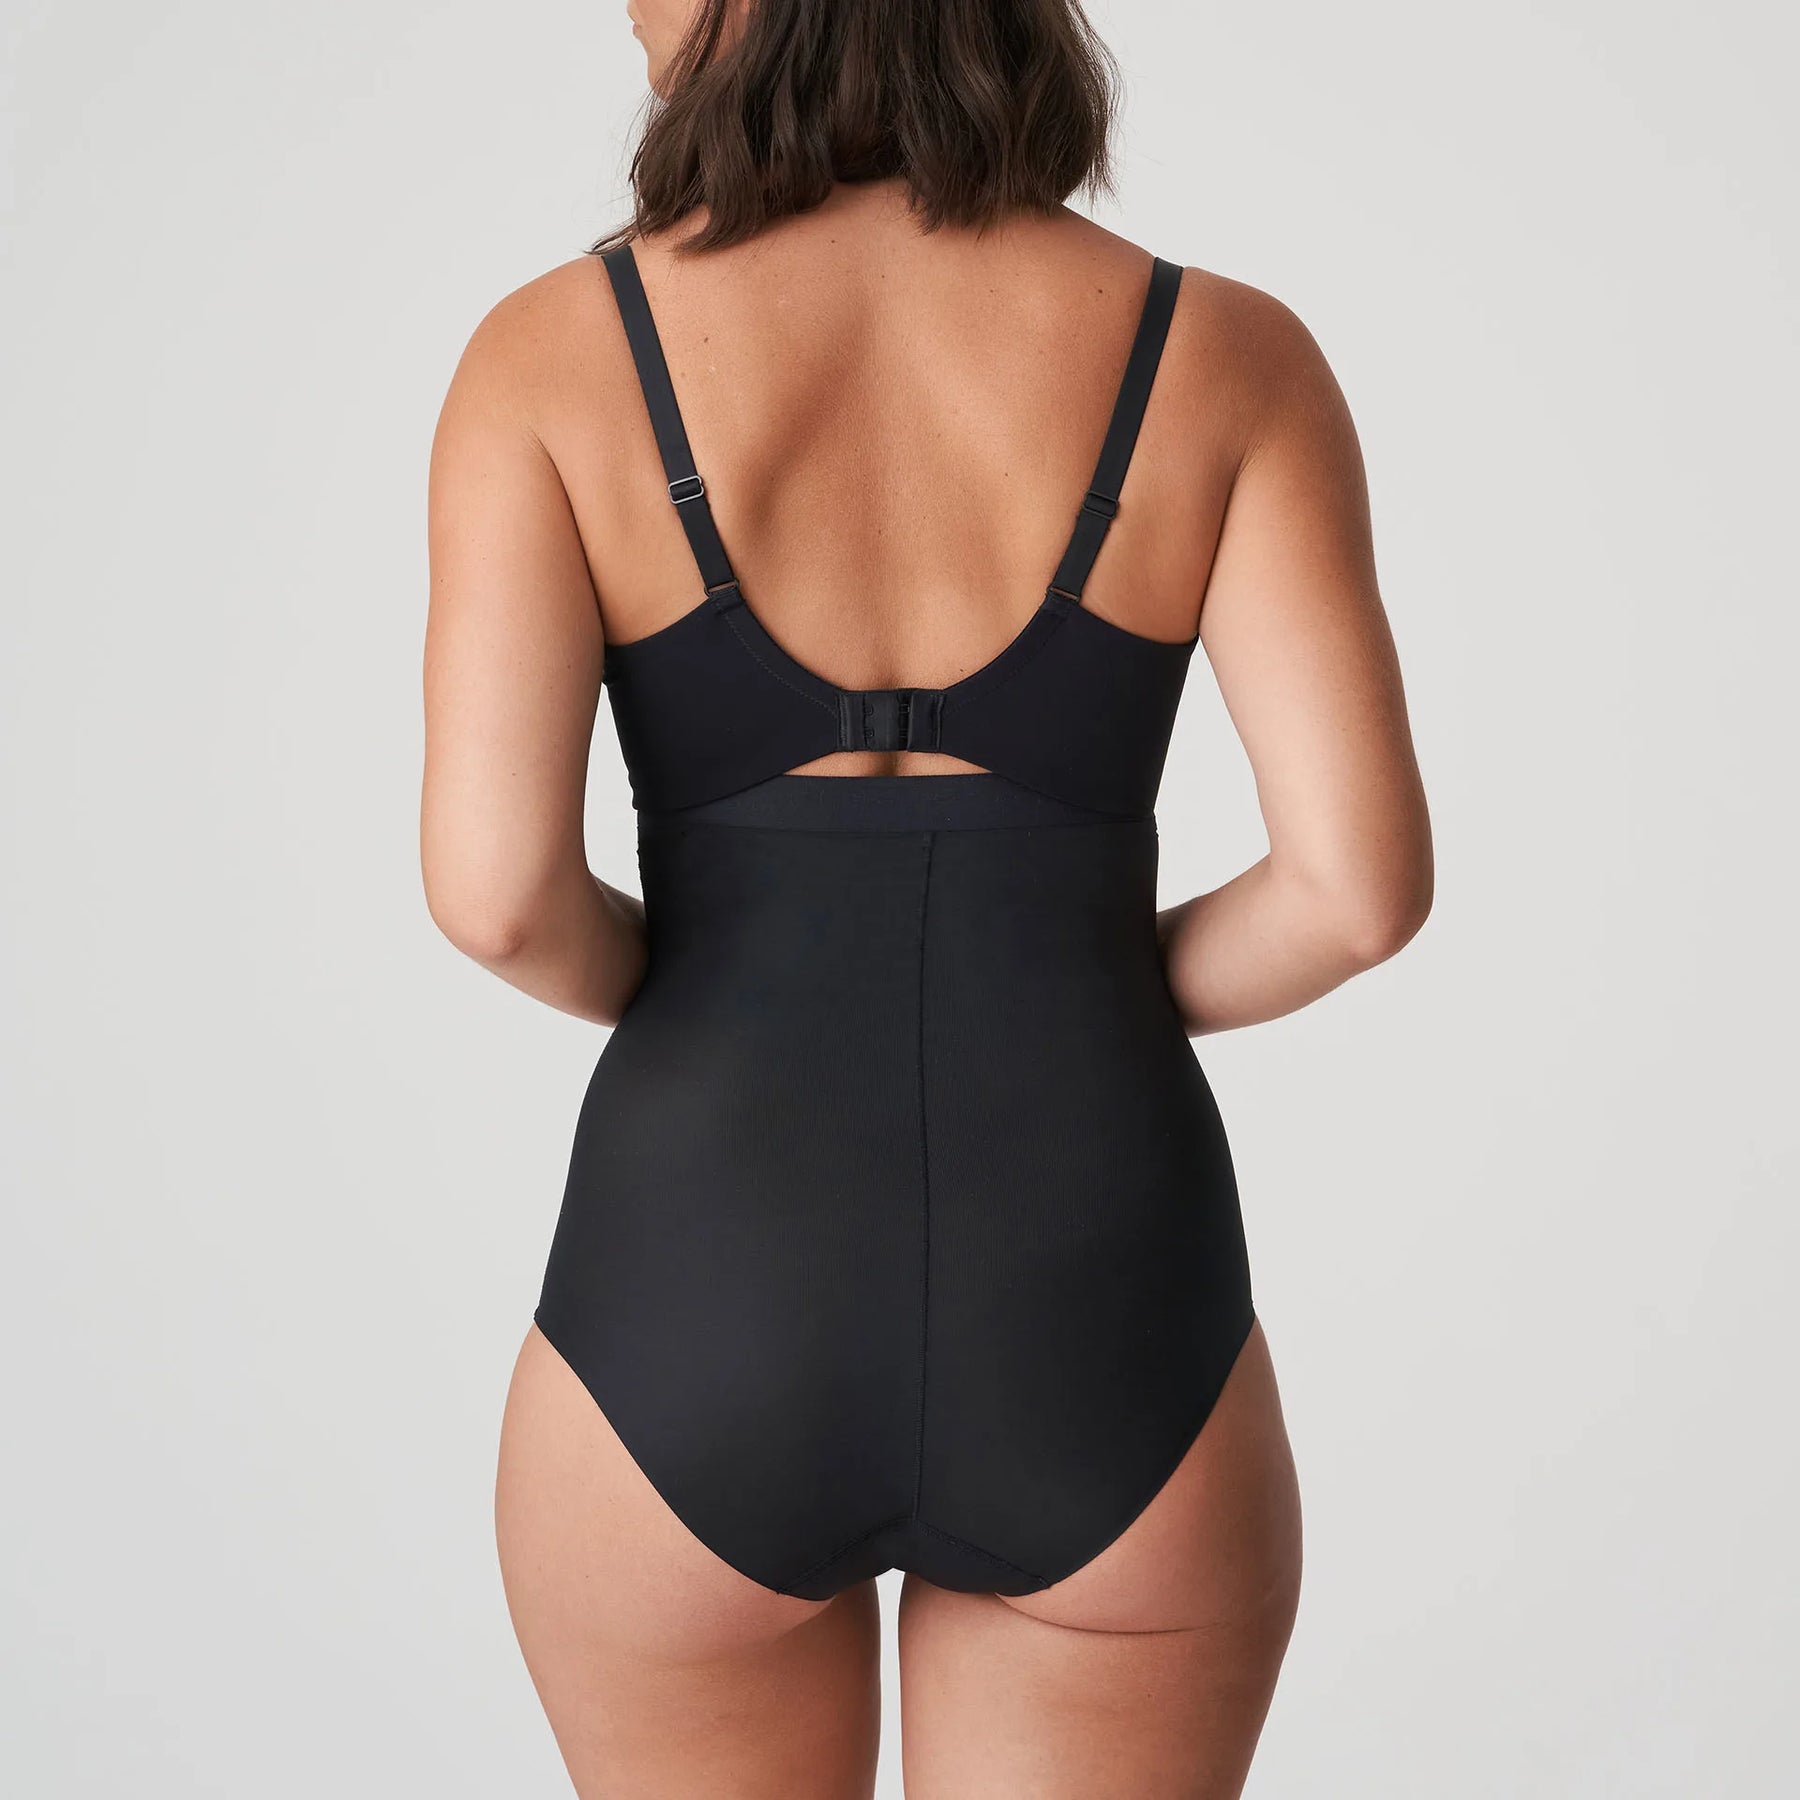 Under Where? Luxury Collection L Black Shapewear